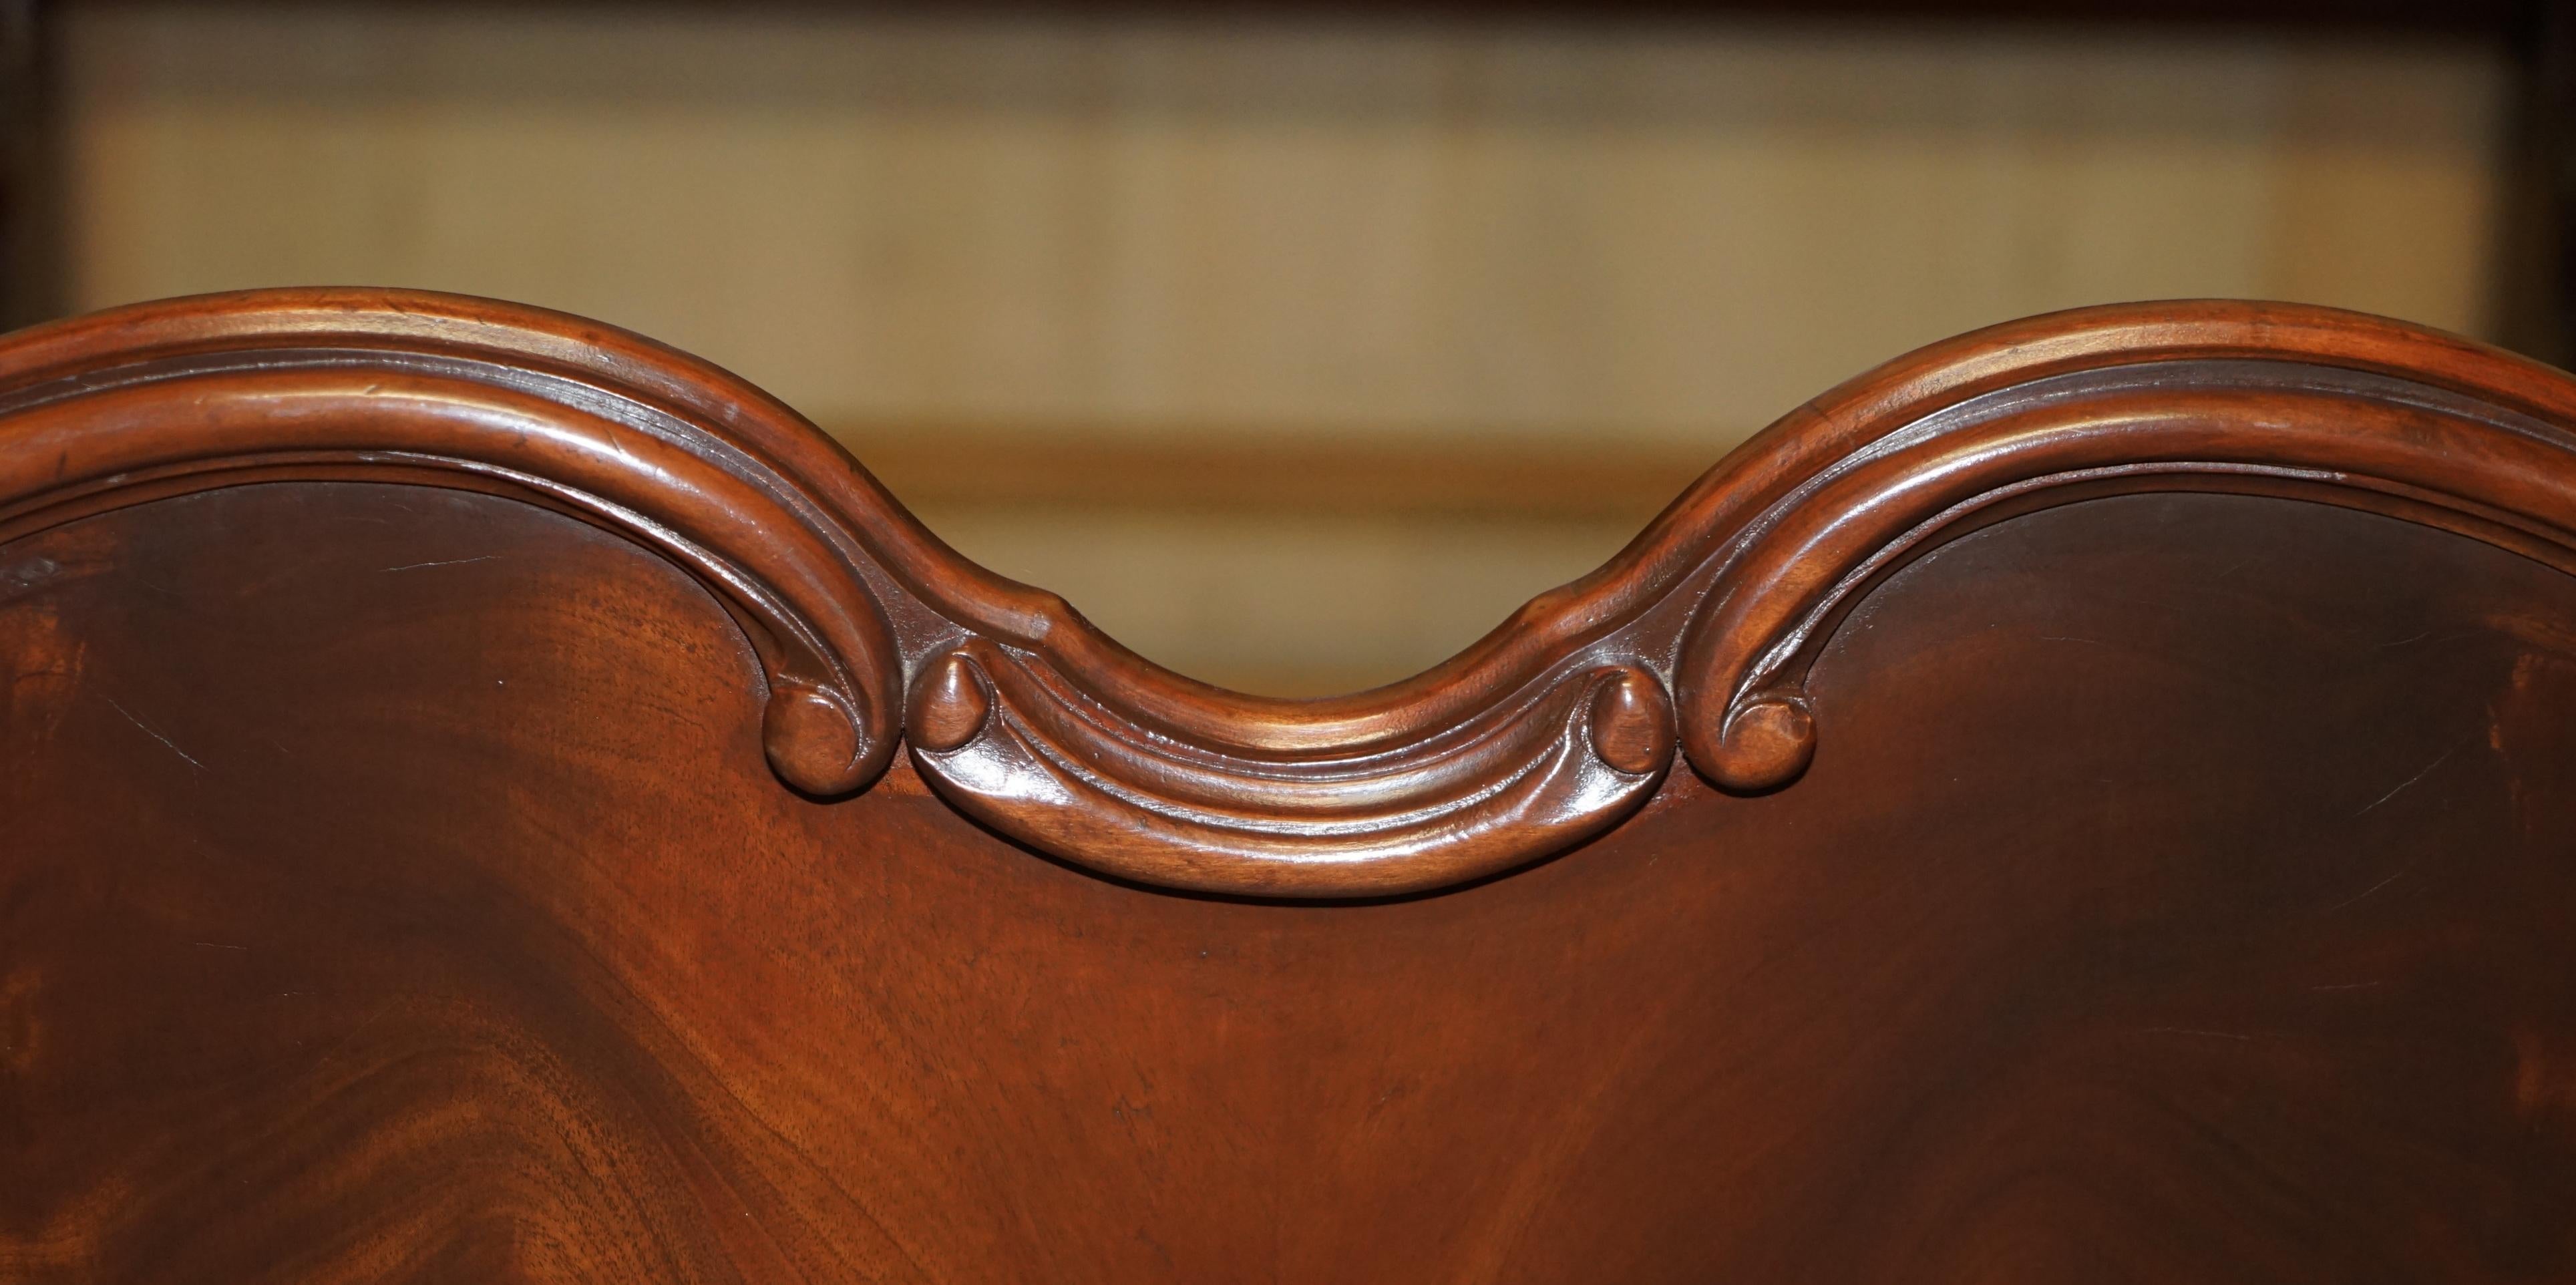 EXQUISITELY CARVED ANTIQUE ViCTORIAN CIRCA 1880 FLAMED HARDWOOD DOUBLE BED FRAME For Sale 2